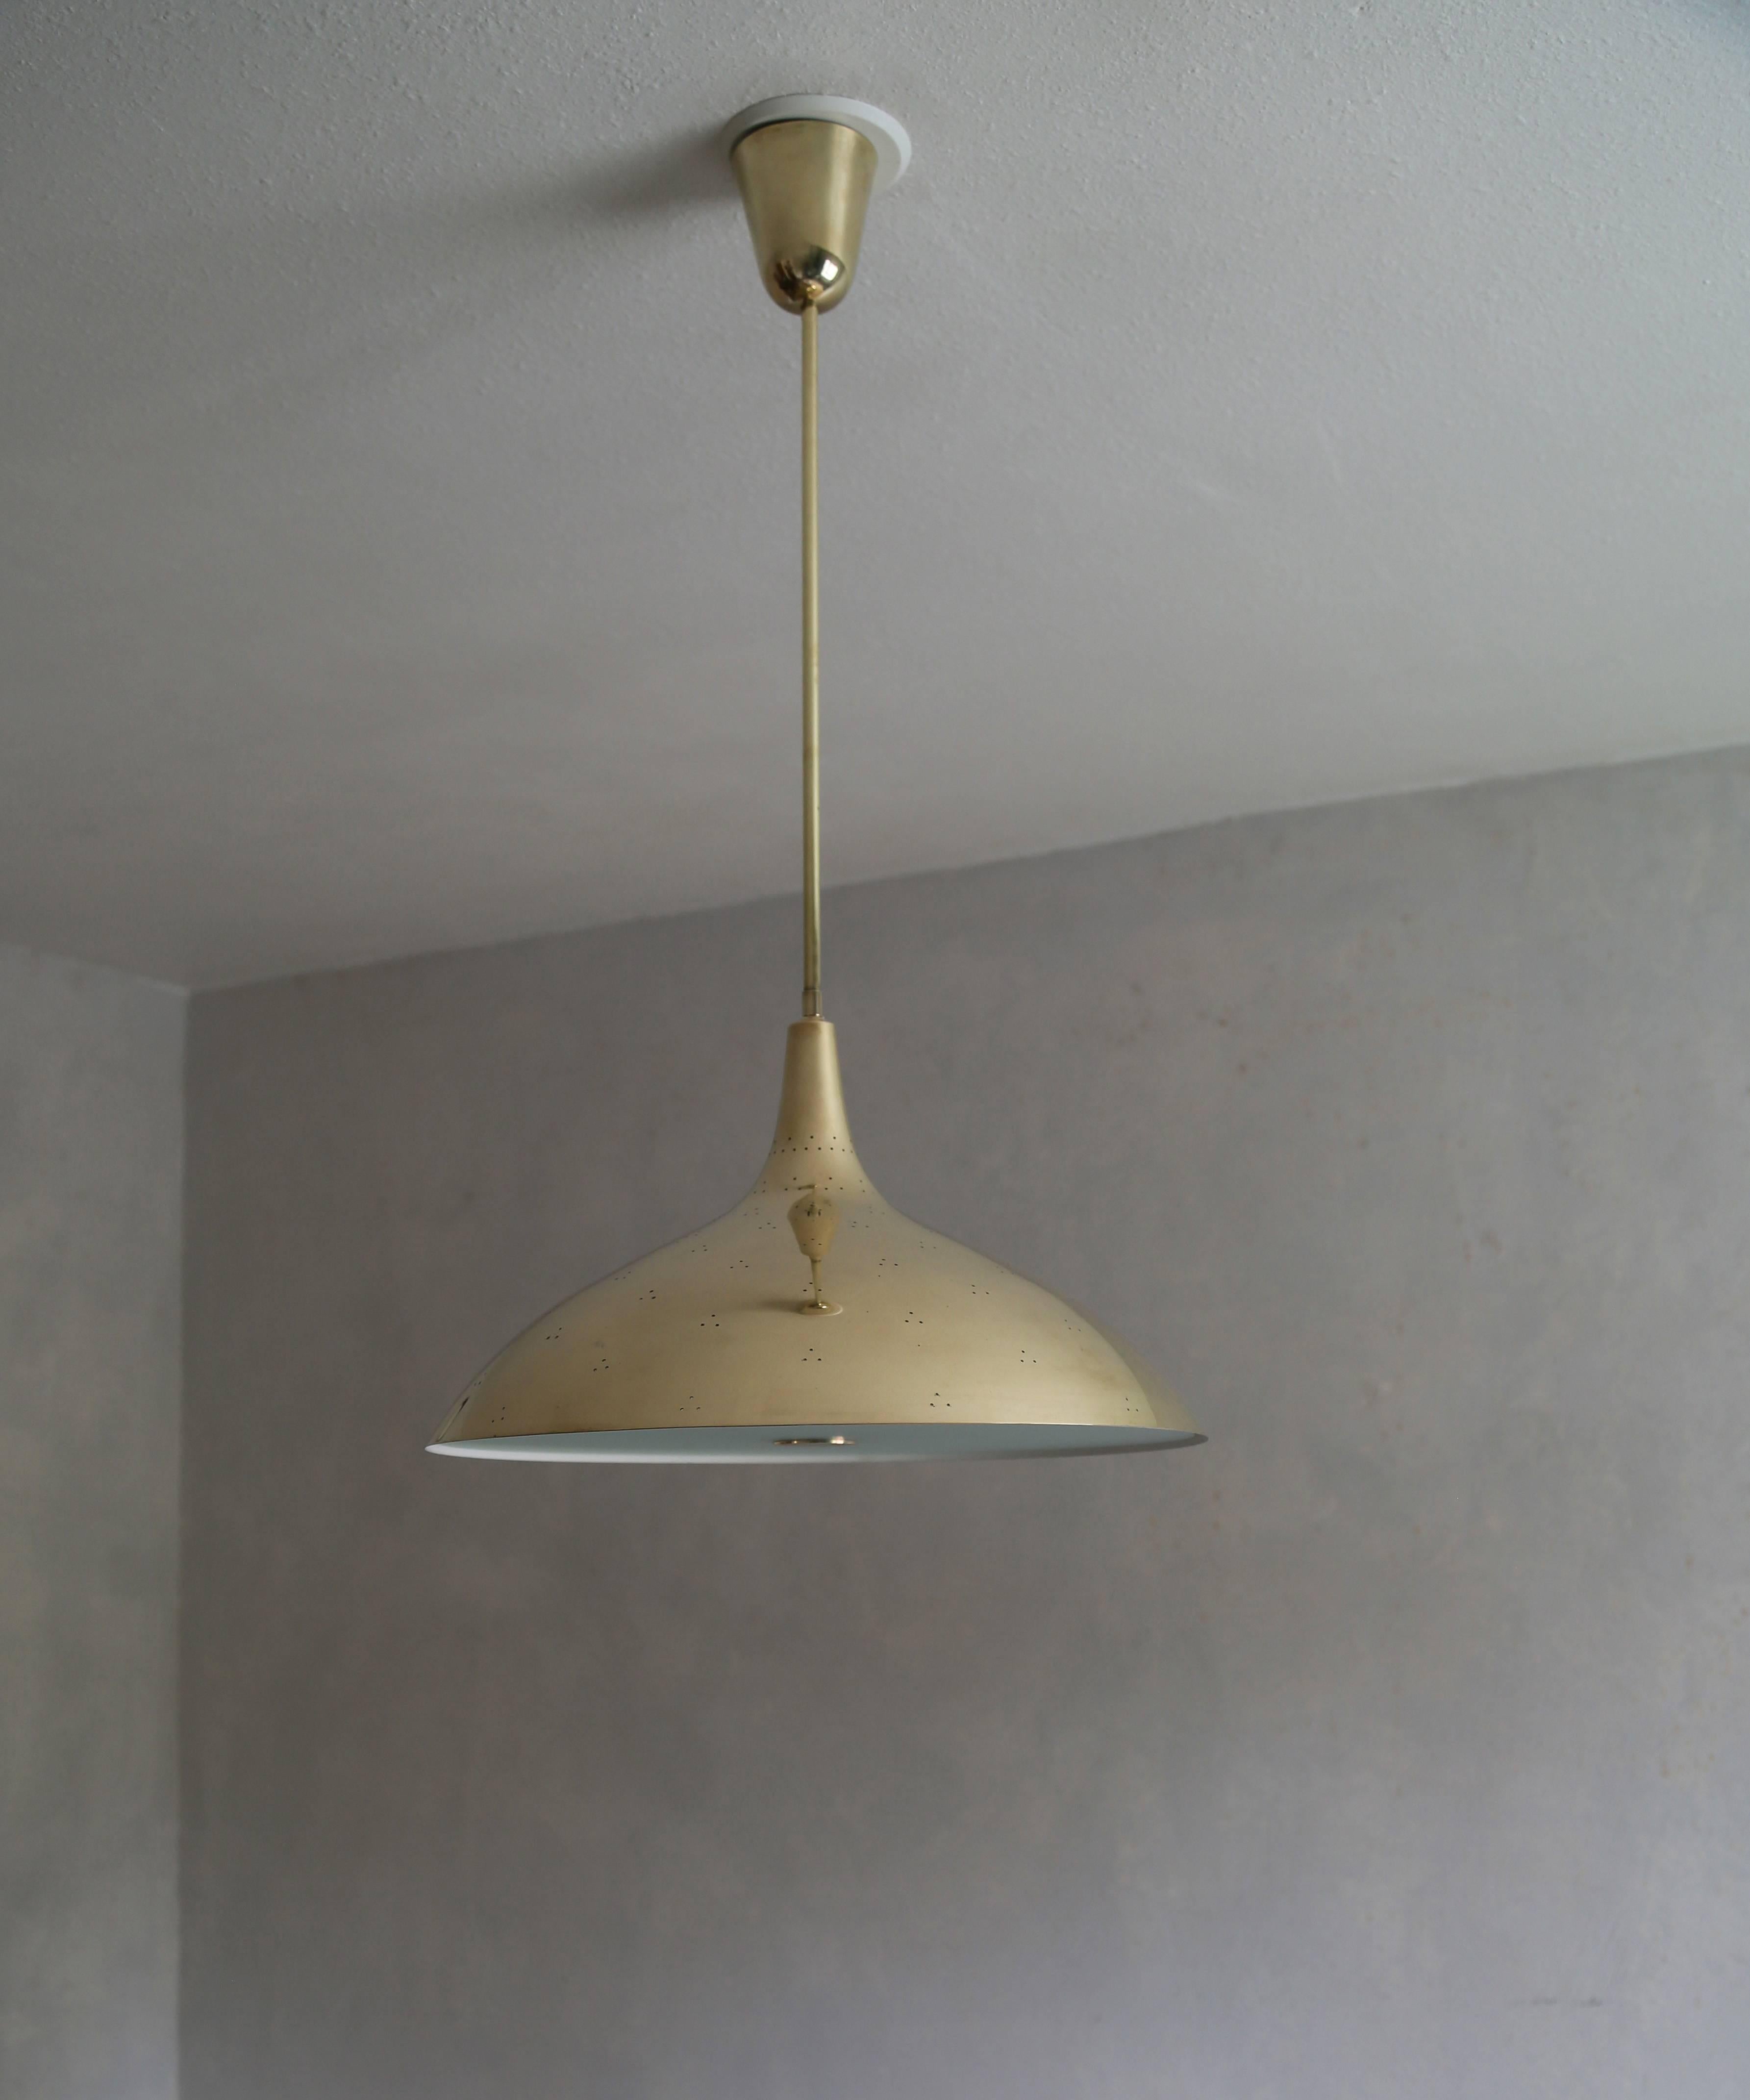 Ceiling lamp model No. J1965 by Paavo Tynell.

Early edition by the original manufacturer Taito Oy

Finland, late 1940s.

Impressed with manufacturer's label TAITO.

Brass and white lacquered brass with a frost glass diffuser.

45 dia x 75 h